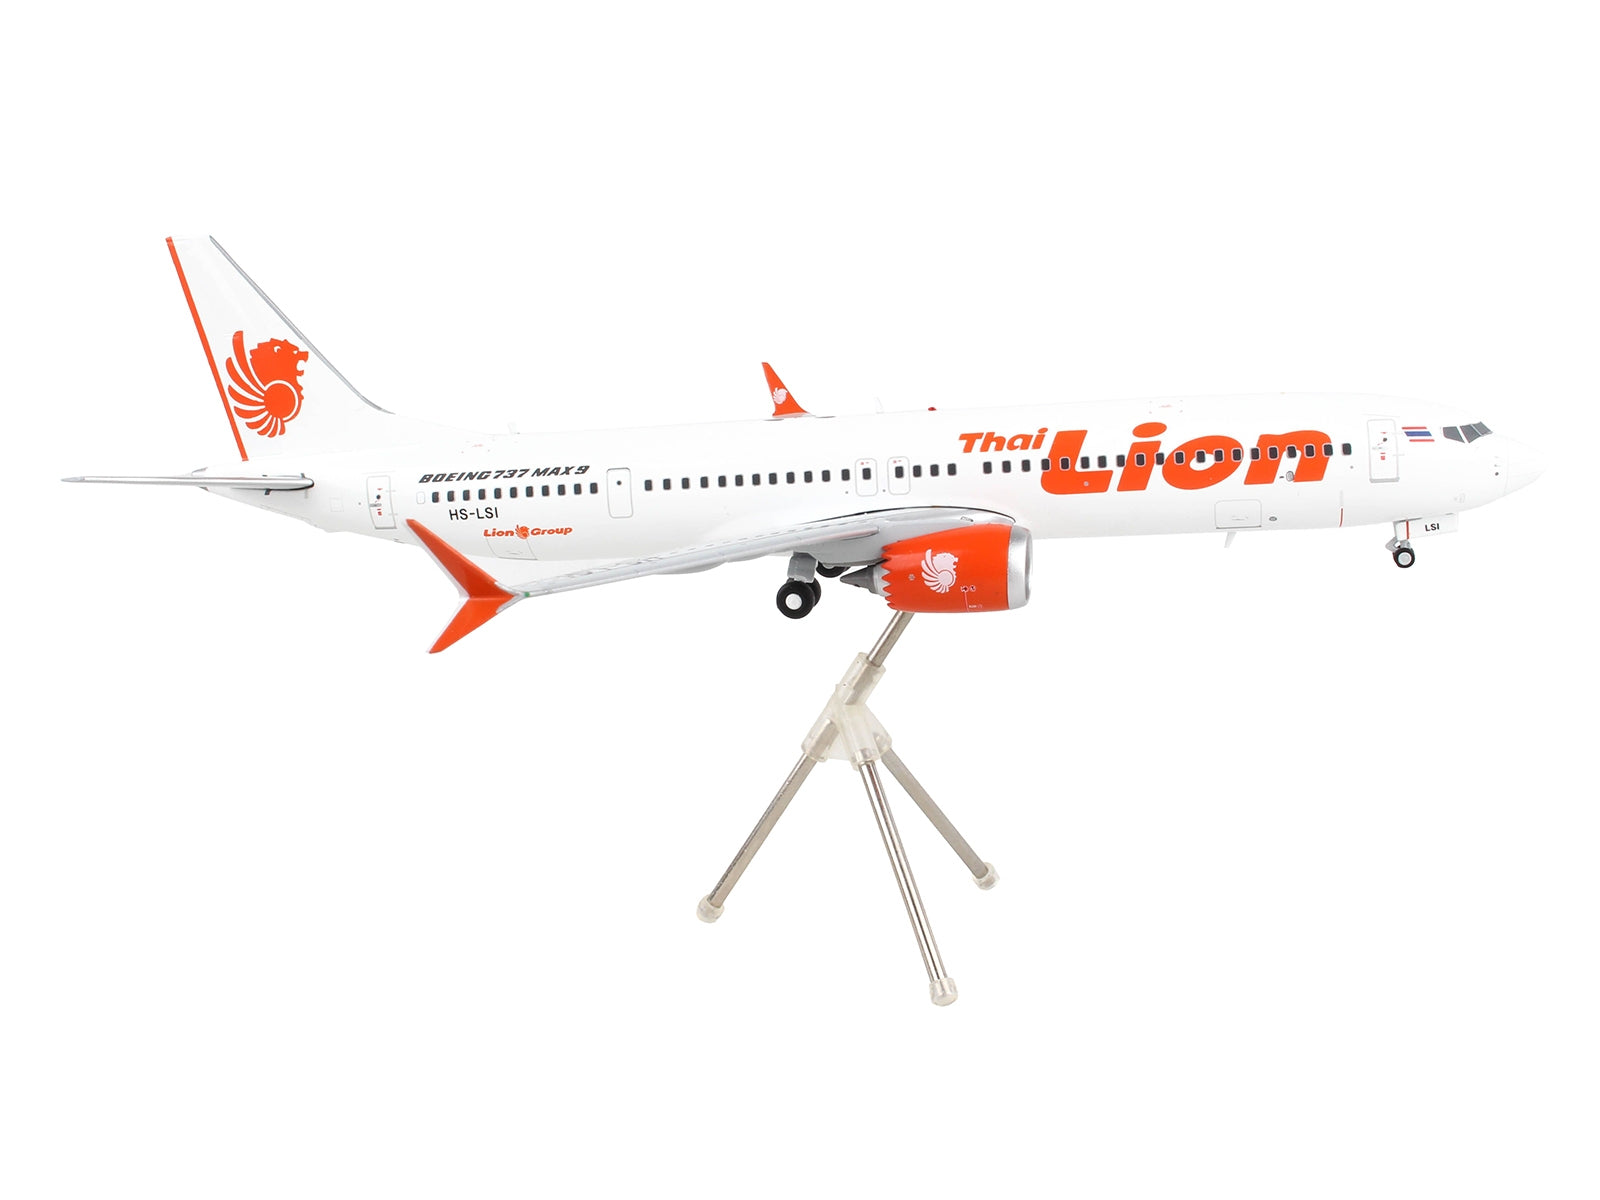 Boeing 737 MAX 9 Commercial Aircraft "Thai Lion Air" White with Orange Tail Graphics "Gemini 200" Series 1/200 Diecast Model Airplane by GeminiJets